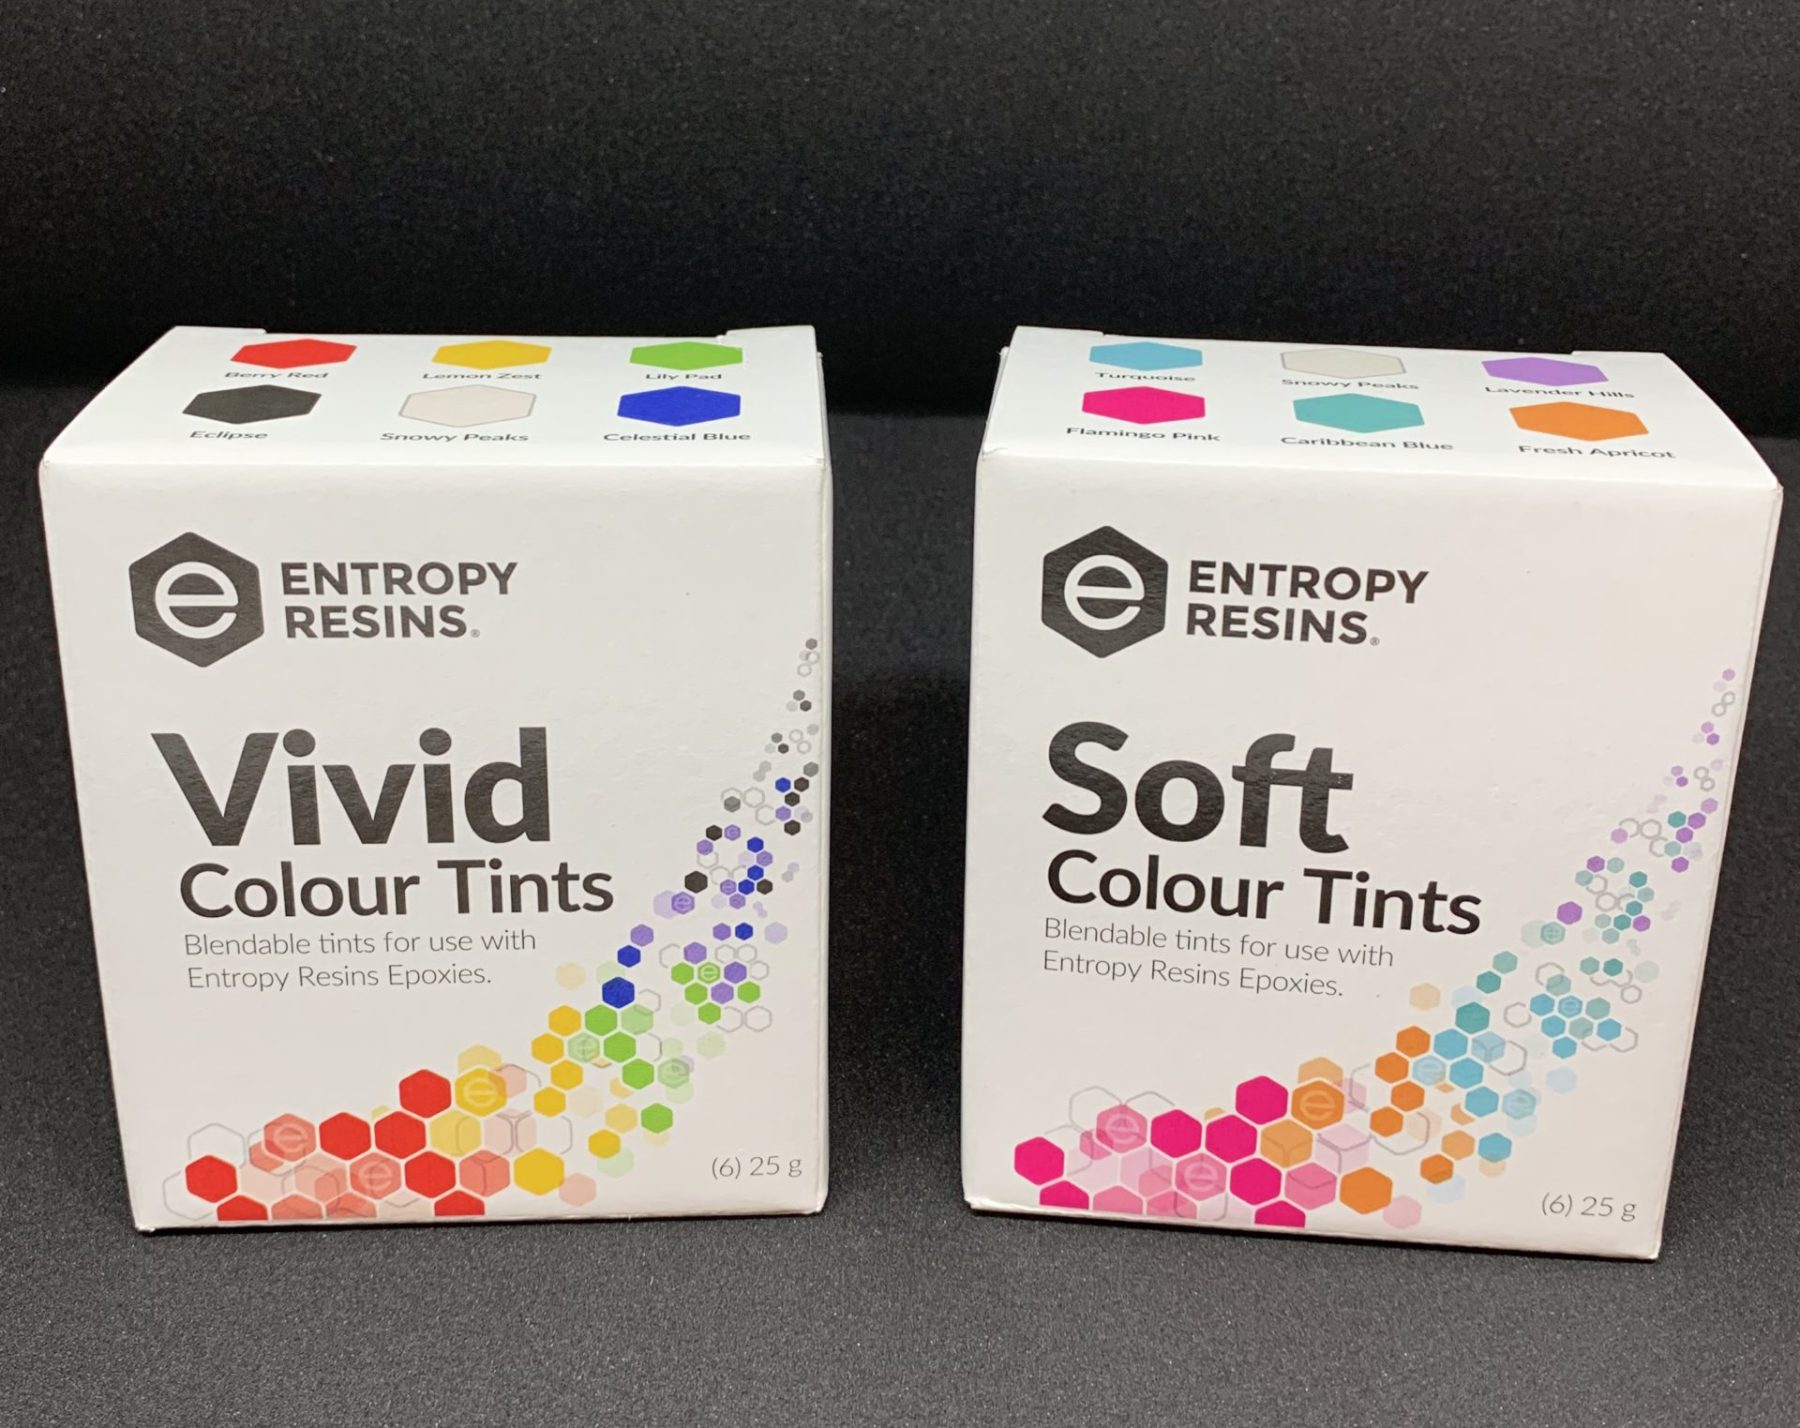 Stunning colour tints for epoxy creations added to Entropy Resins® range